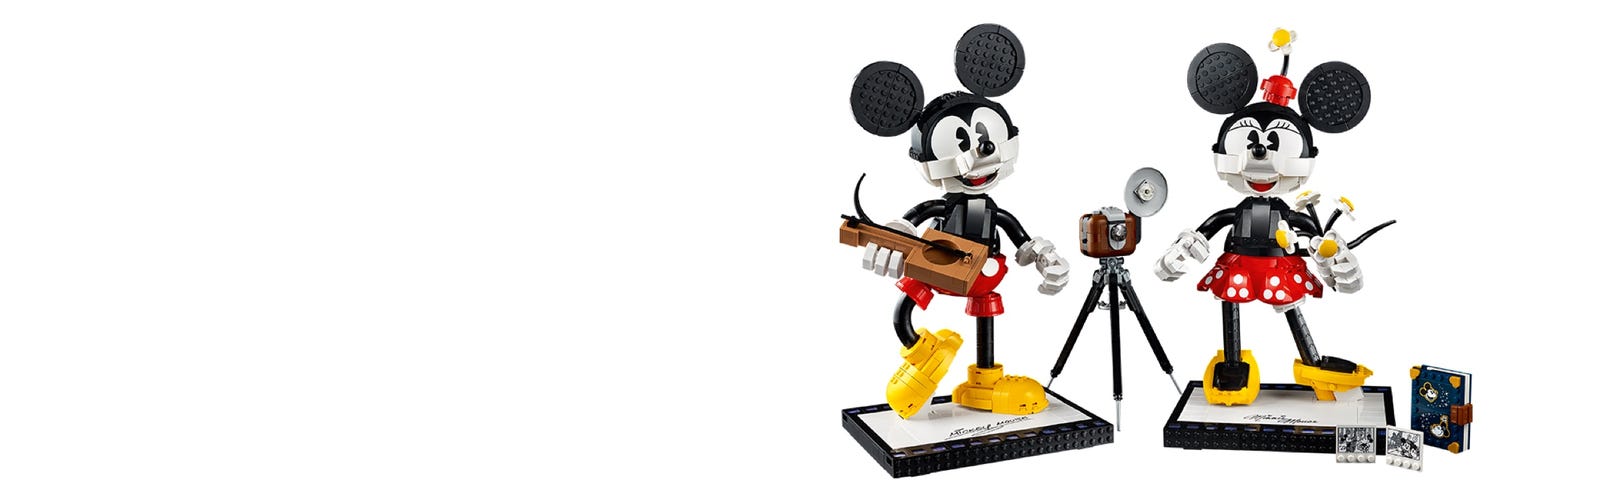  LEGO Mickey Mouse, Minnie Mouse, Donald Duck, Daisy Duck Disney  Minifigures : Toys & Games